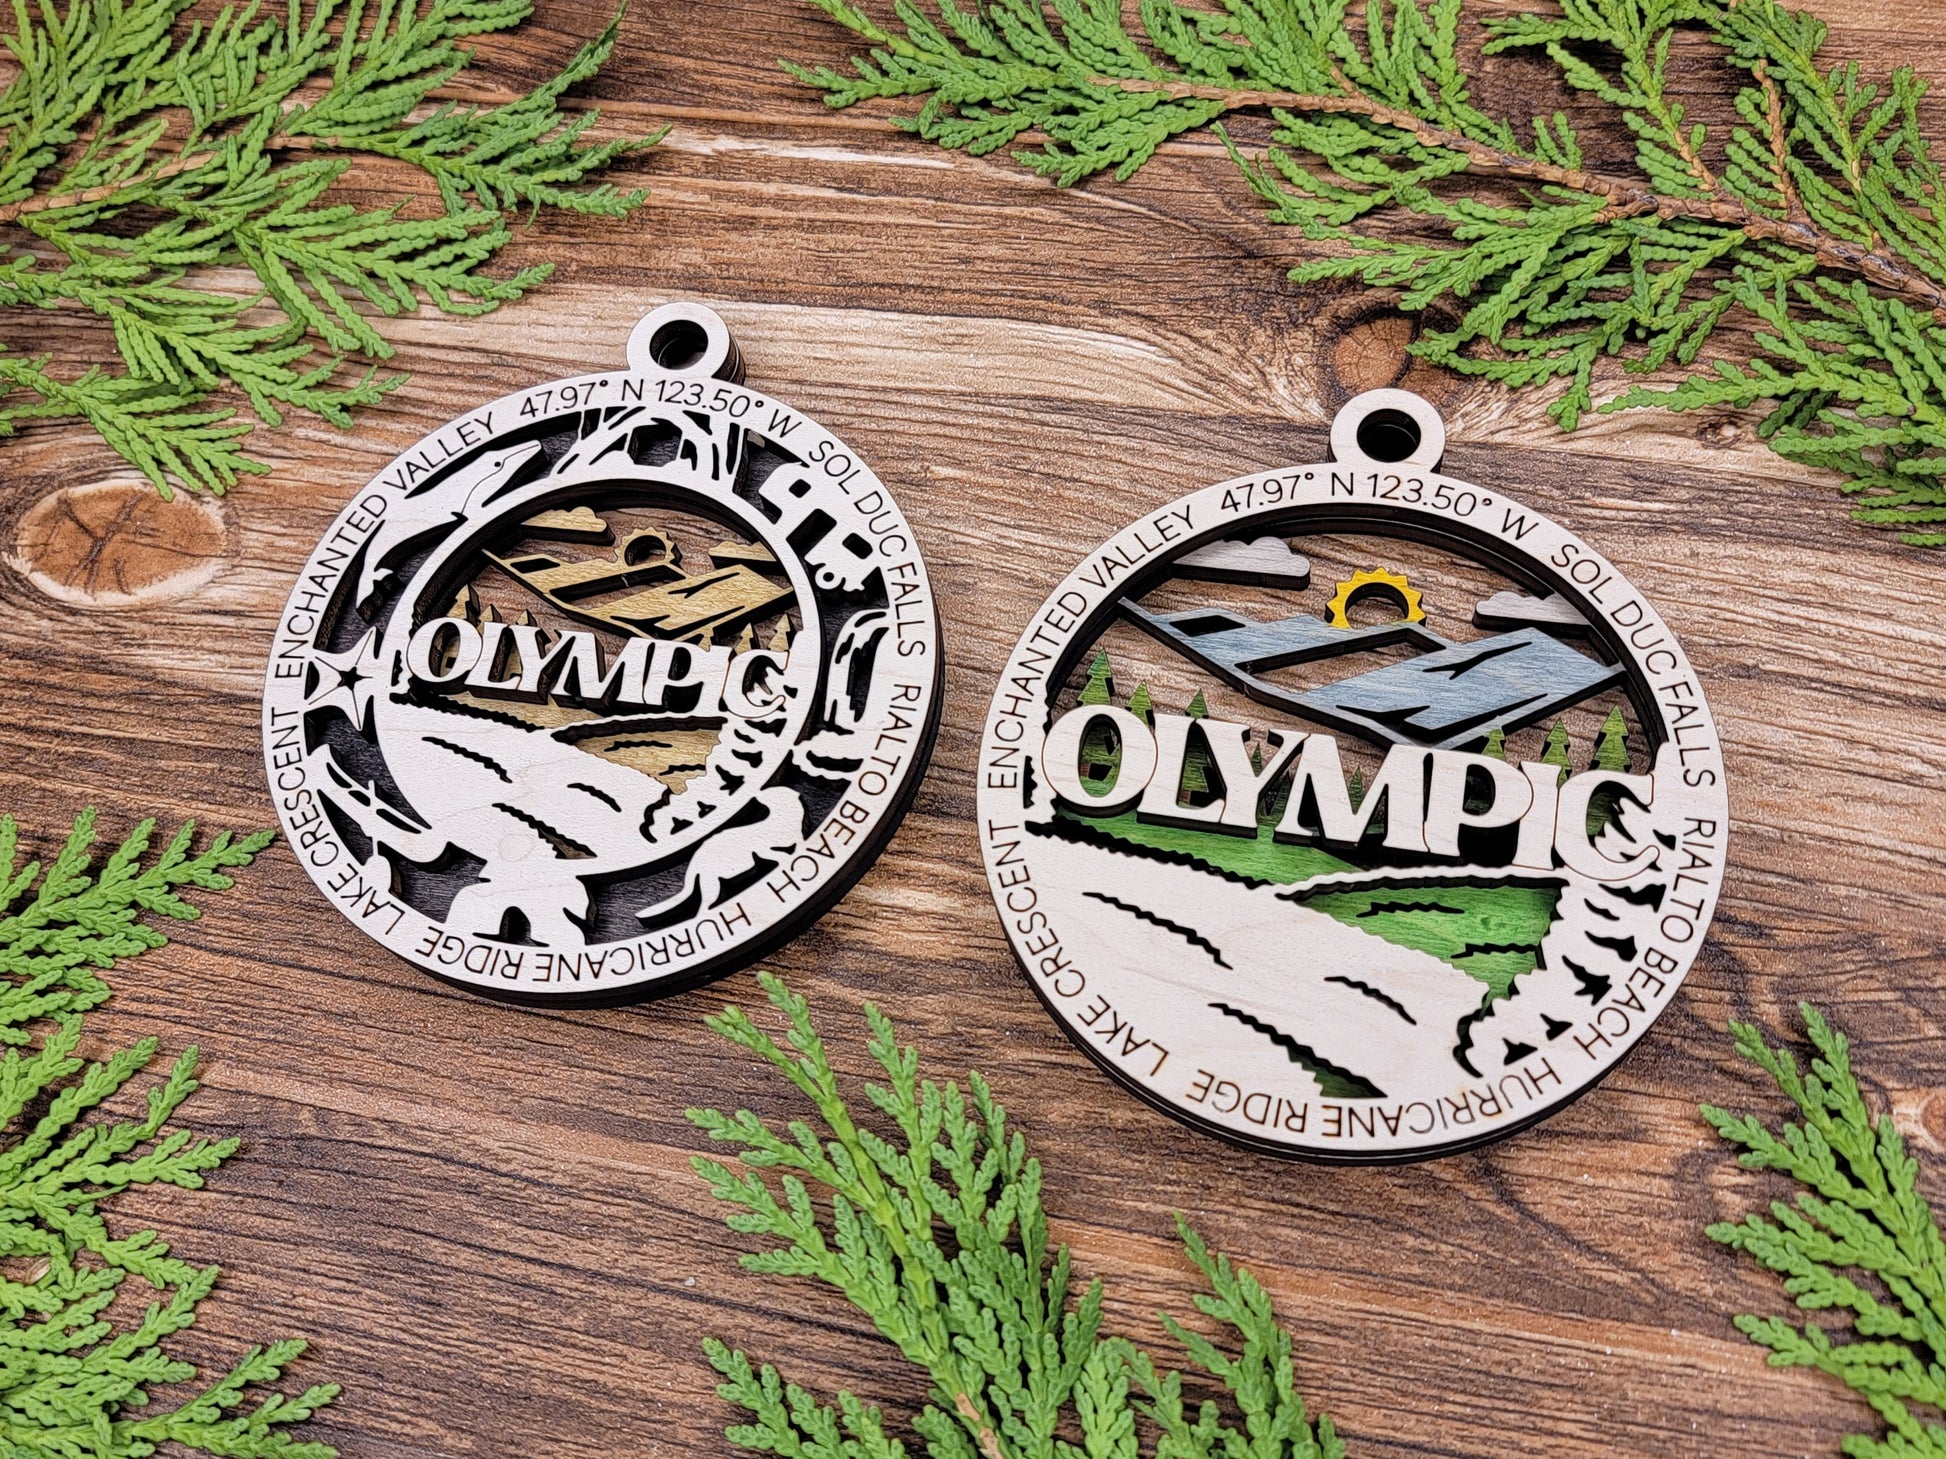 Olympic Park Ornament - Includes 2 Ornaments - Laser Design SVG, PDF, AI File Download - Tested On Glowforge and LightBurn